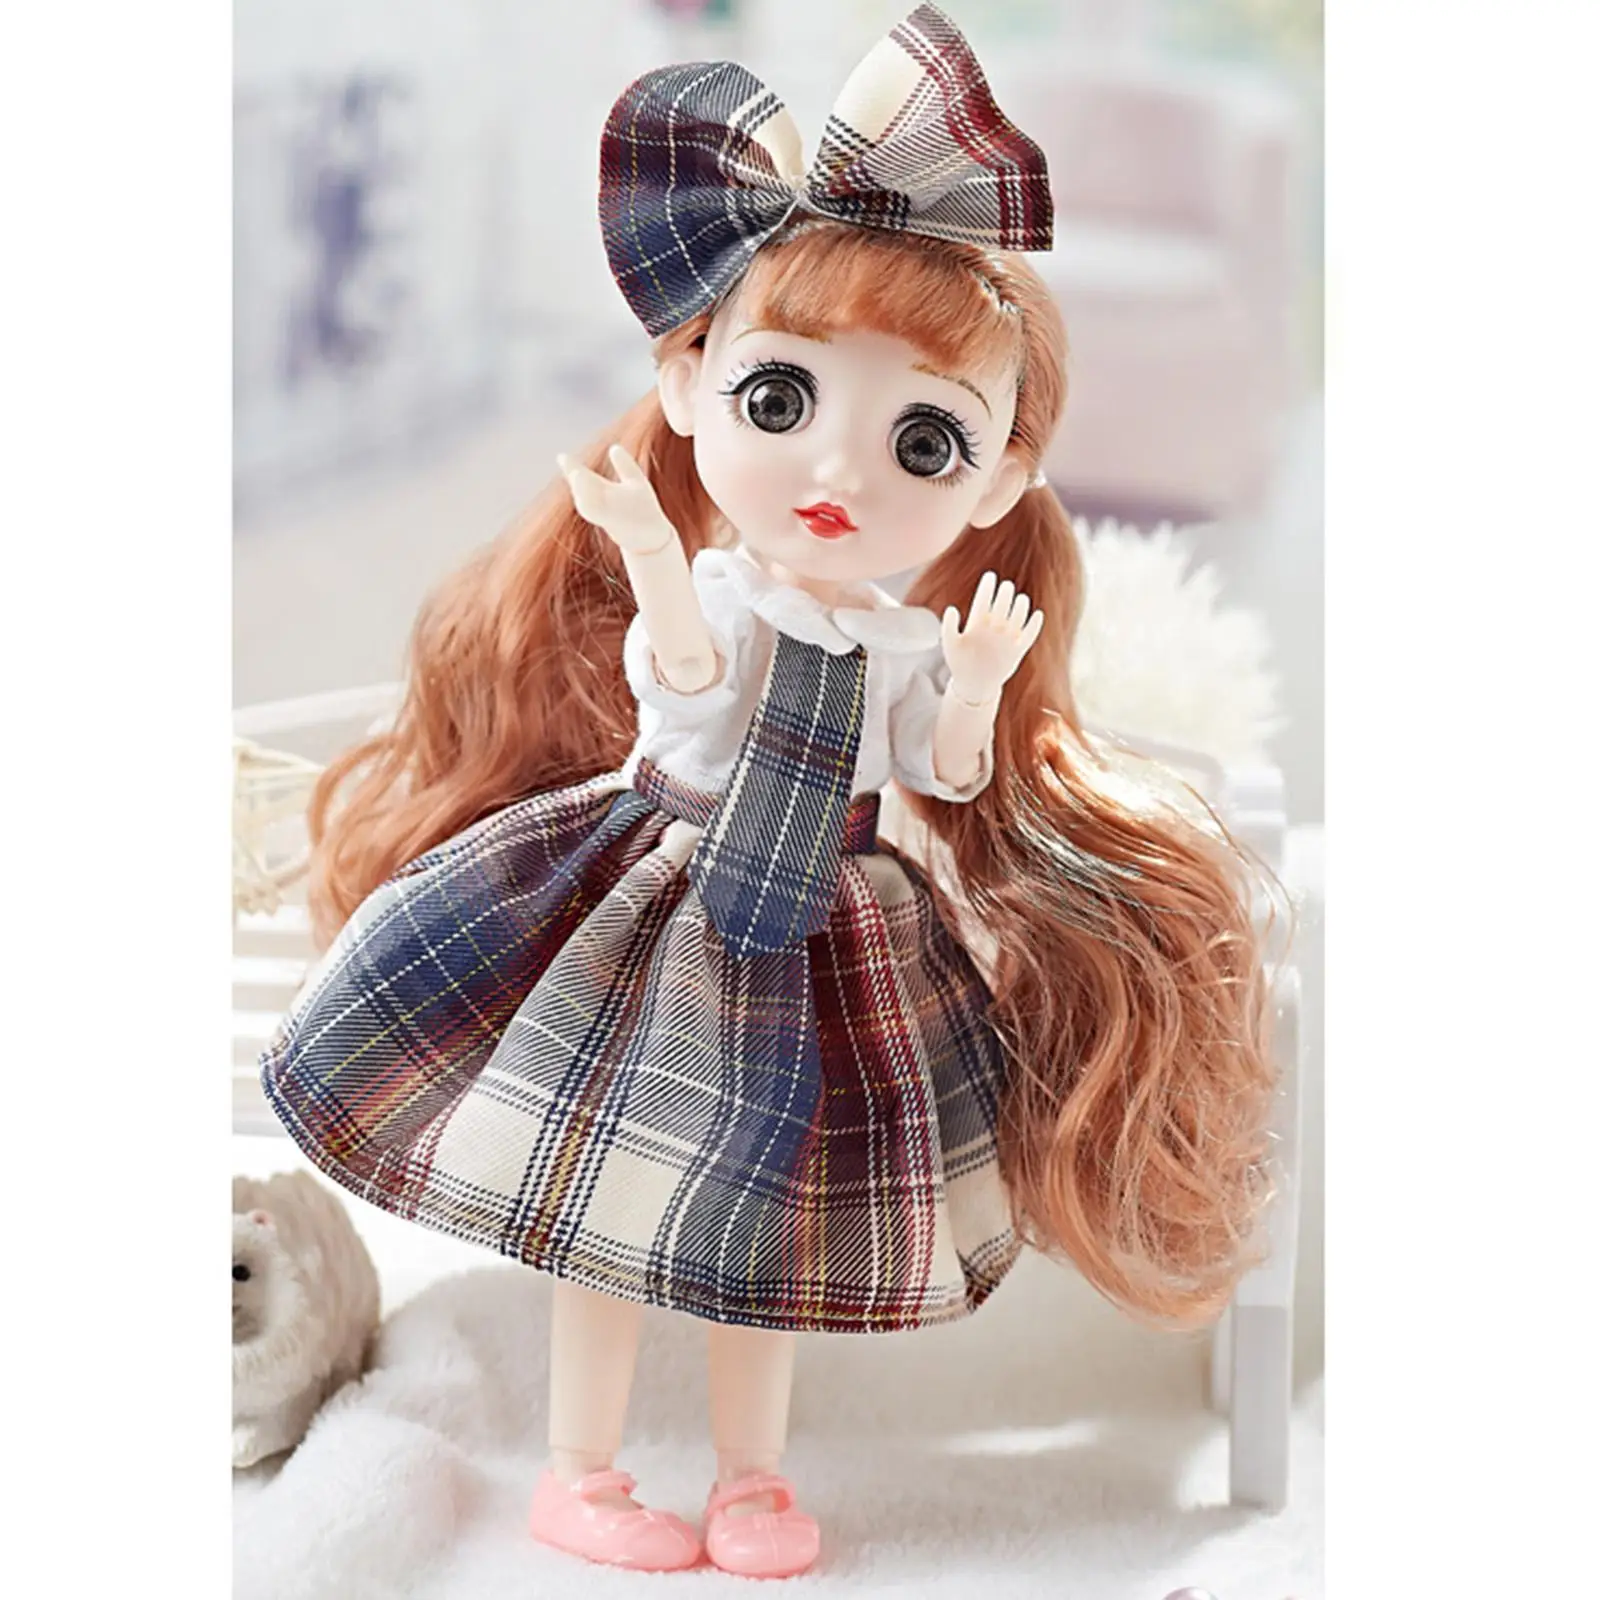 Movable  Girl Doll Clothes Shoes JK Uniform Beautiful 1/6 for Girls Gifts